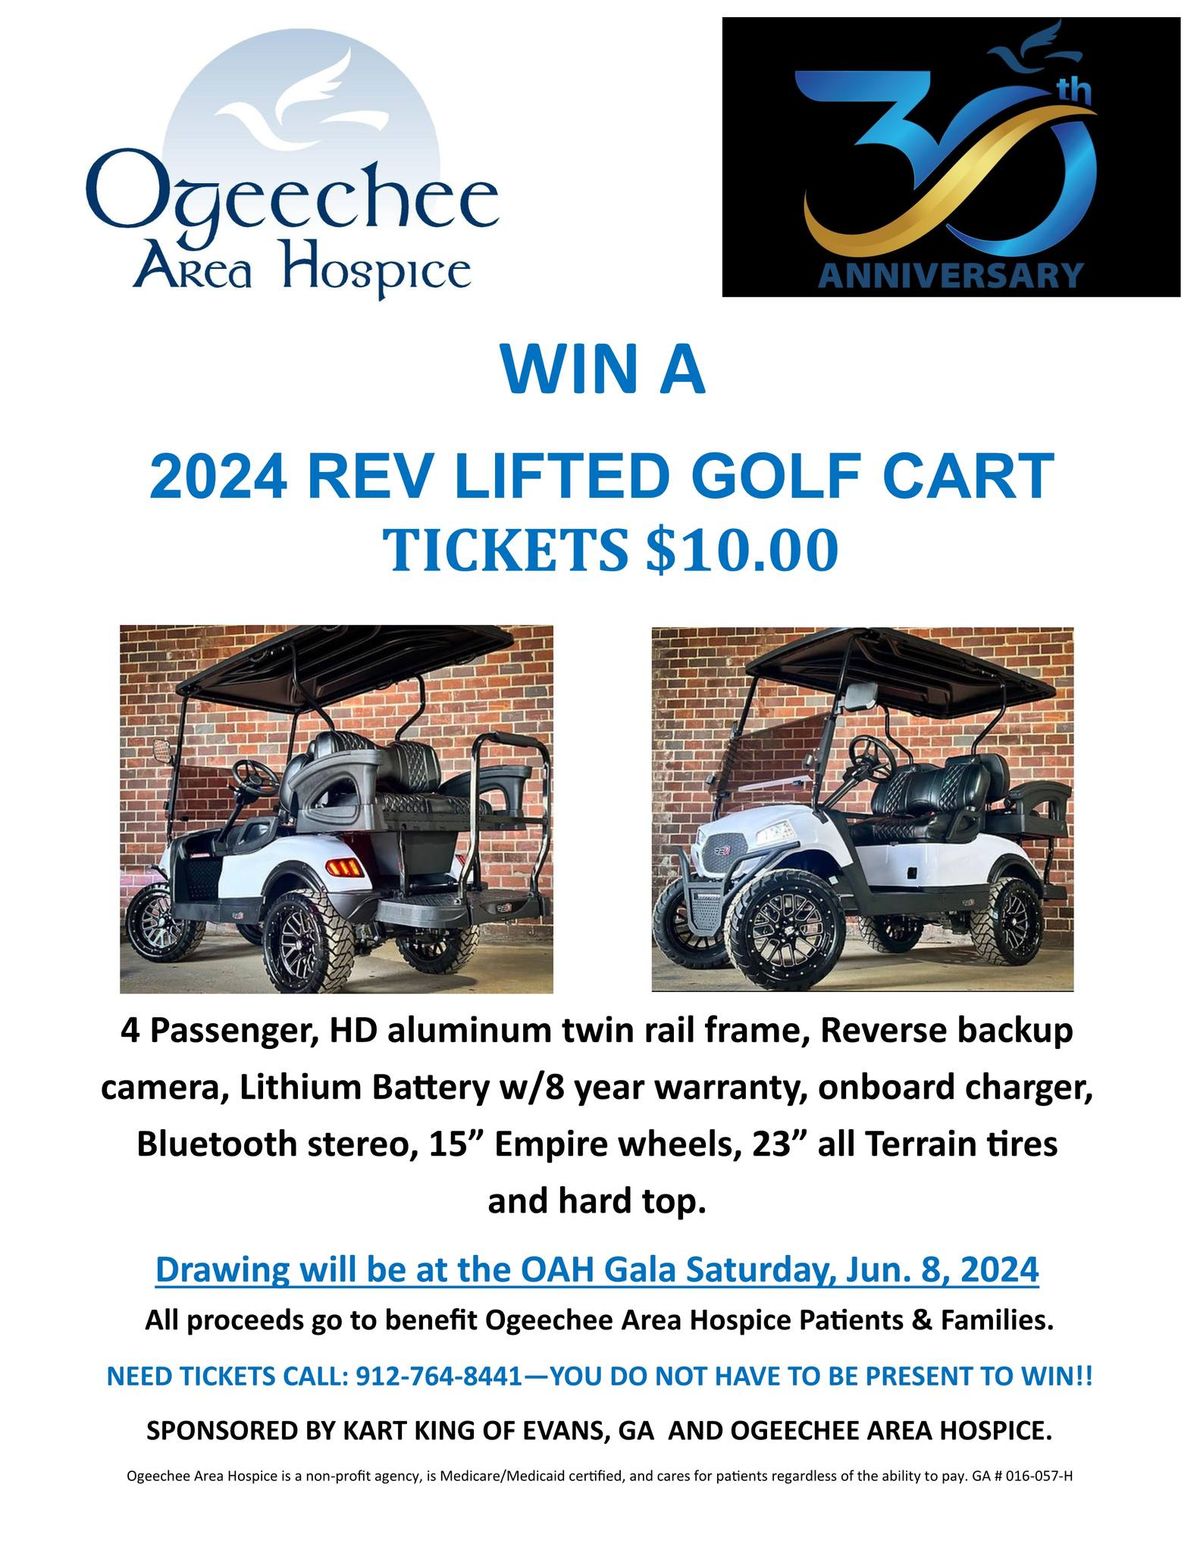 Drawing for the 2024 Rev Golf Cart will be at our Ogeechee Area Gala on Saturday, June 8th. 